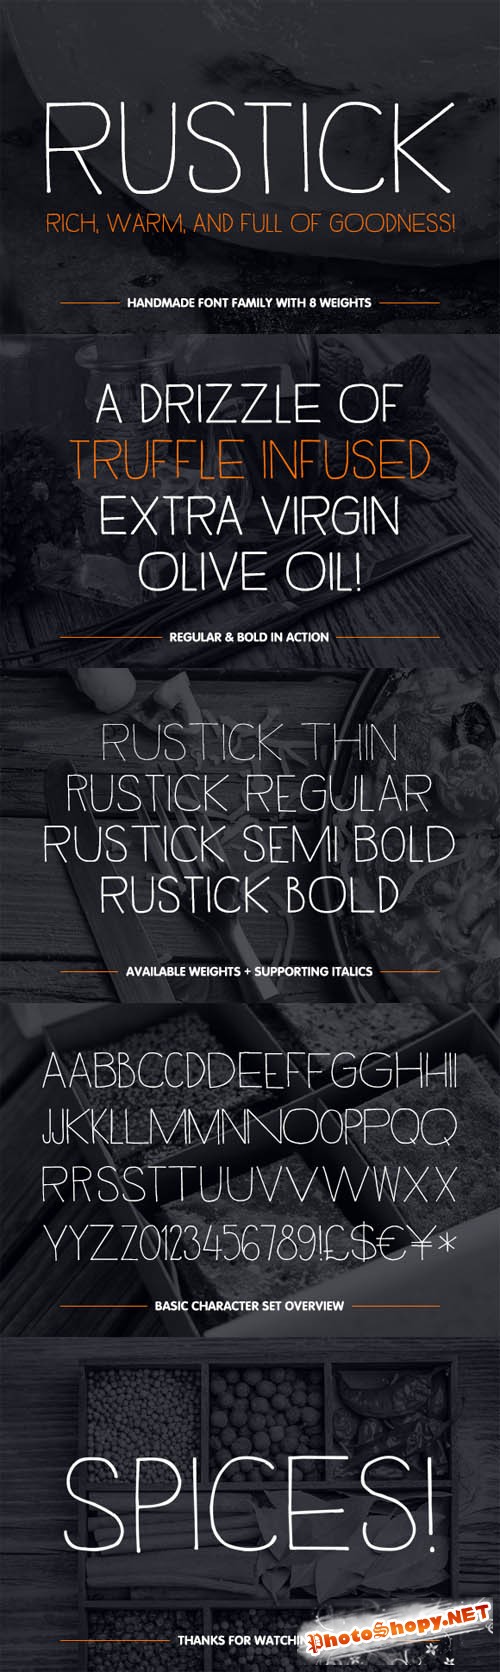 Rustick Type Family Font